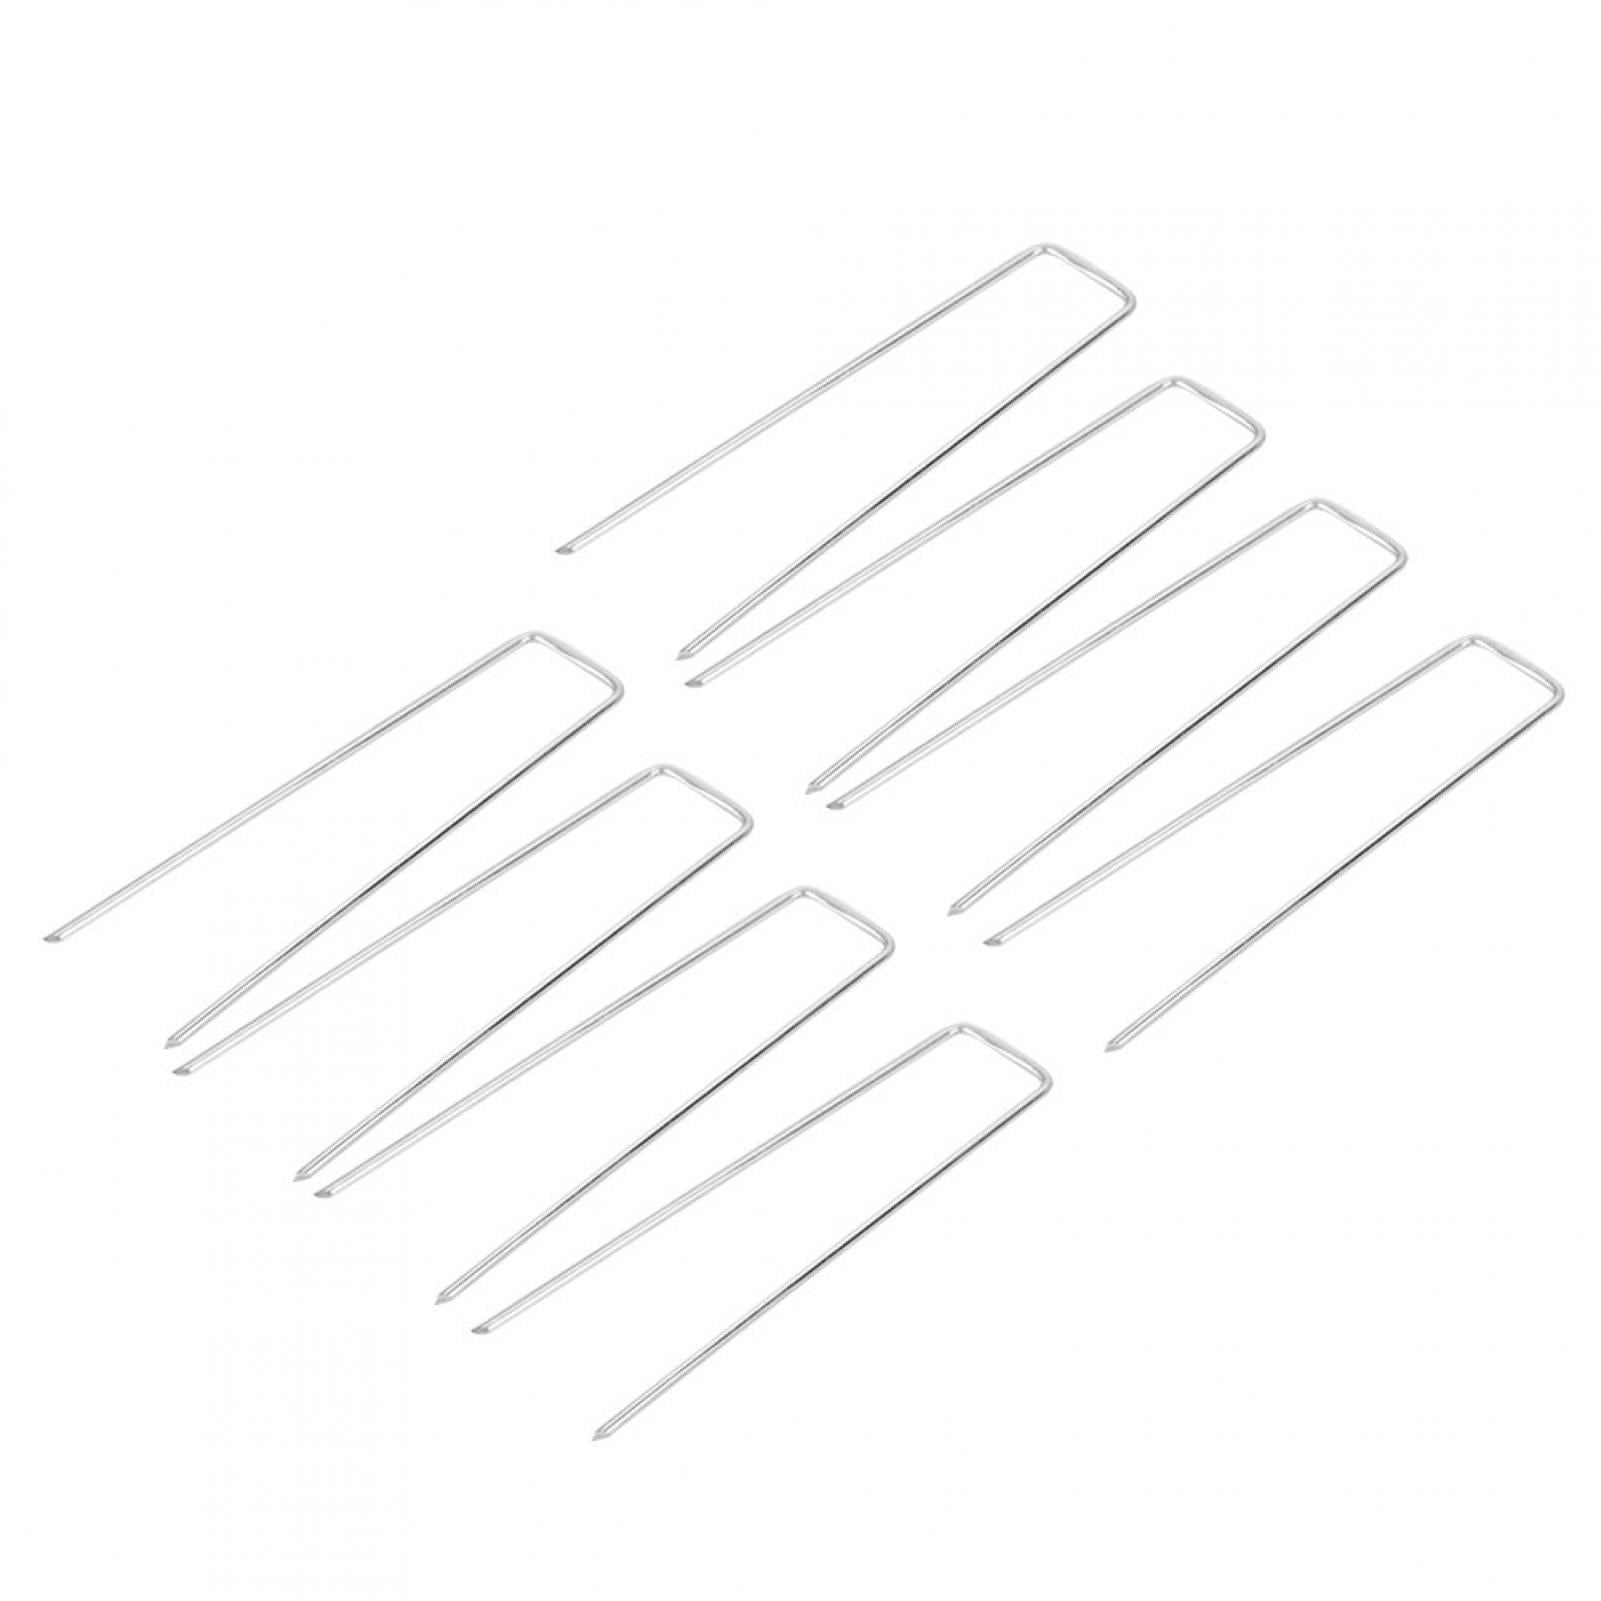 72 Total DeWitt Anchor Pins for Landscaping-6 Packs of 12 